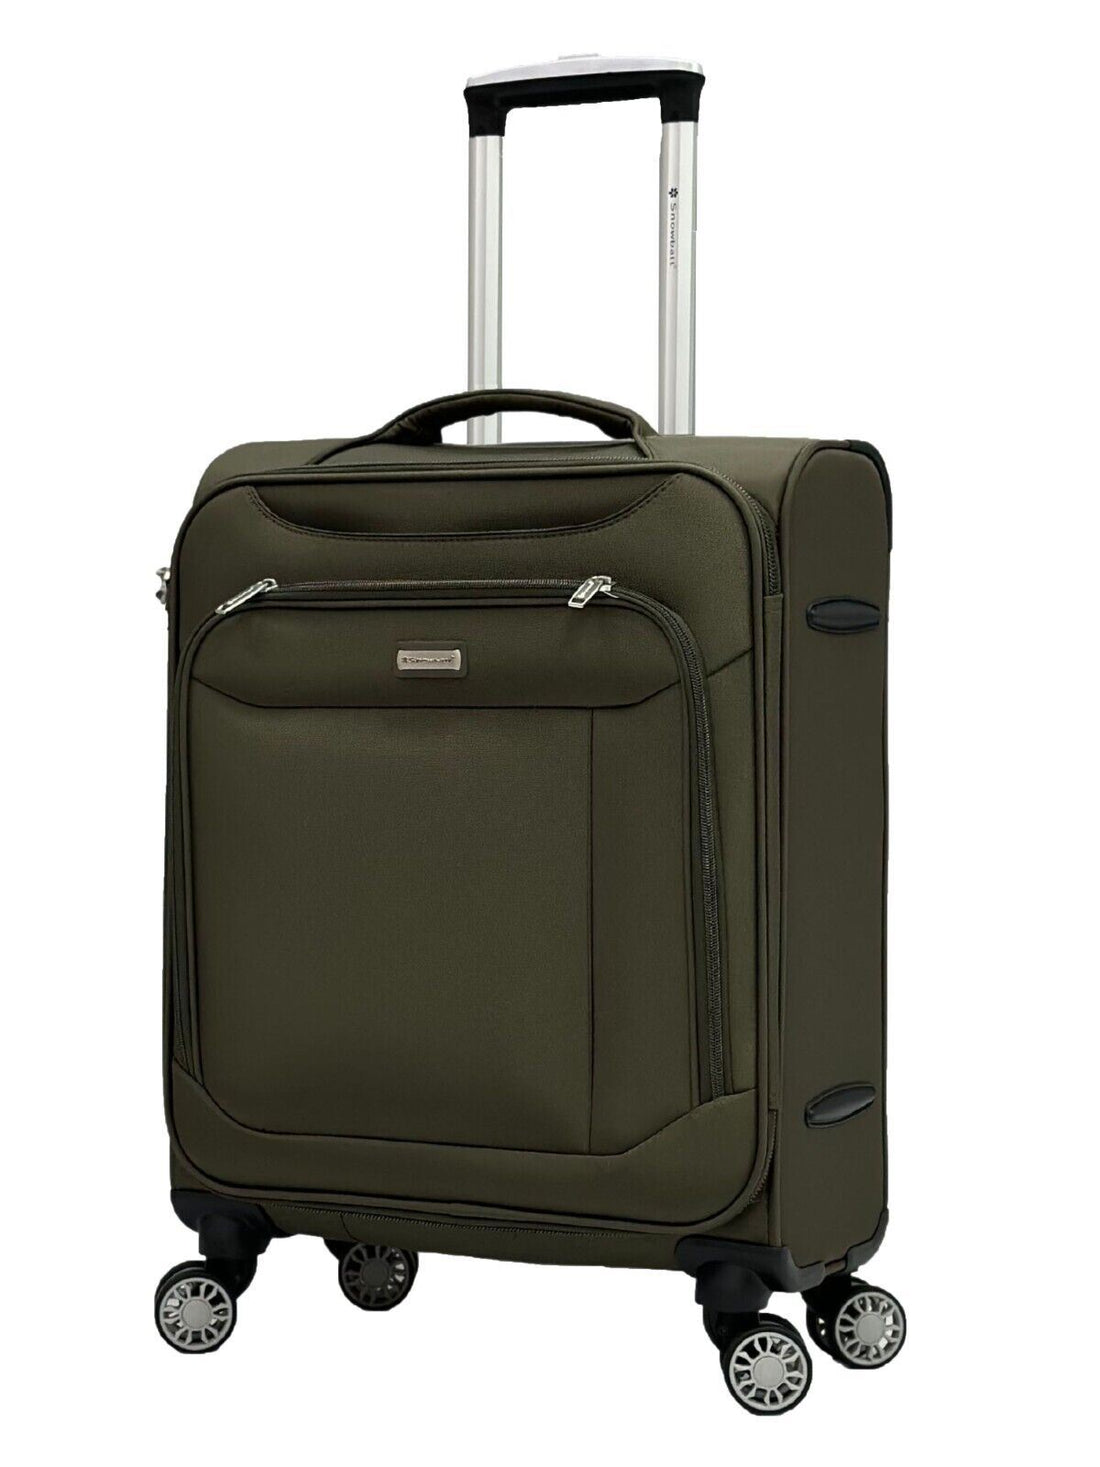 Centreville Cabin Soft Shell Suitcase in Khaki